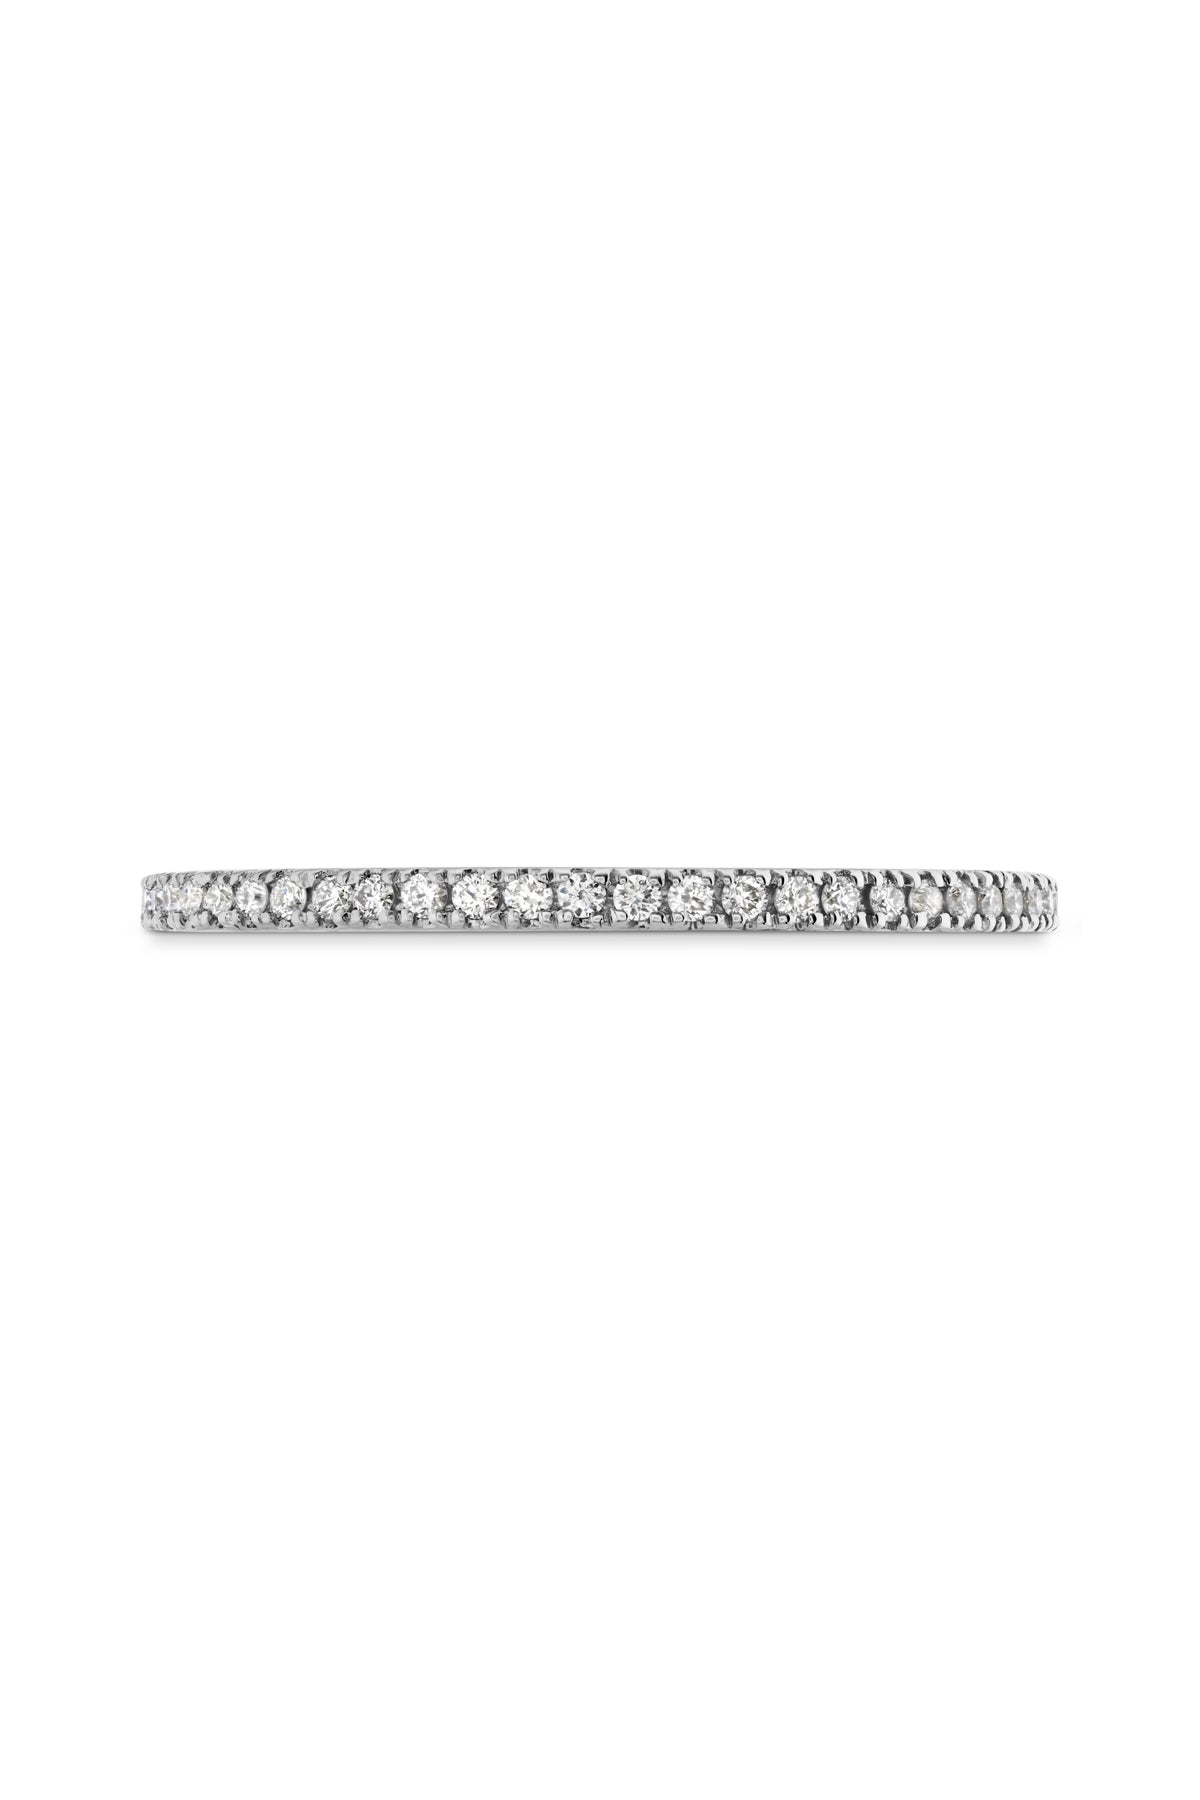 Classic Eternity Band From Hearts On Fire available at LeGassick Diamonds and Jewellery Gold Coast, Australia.